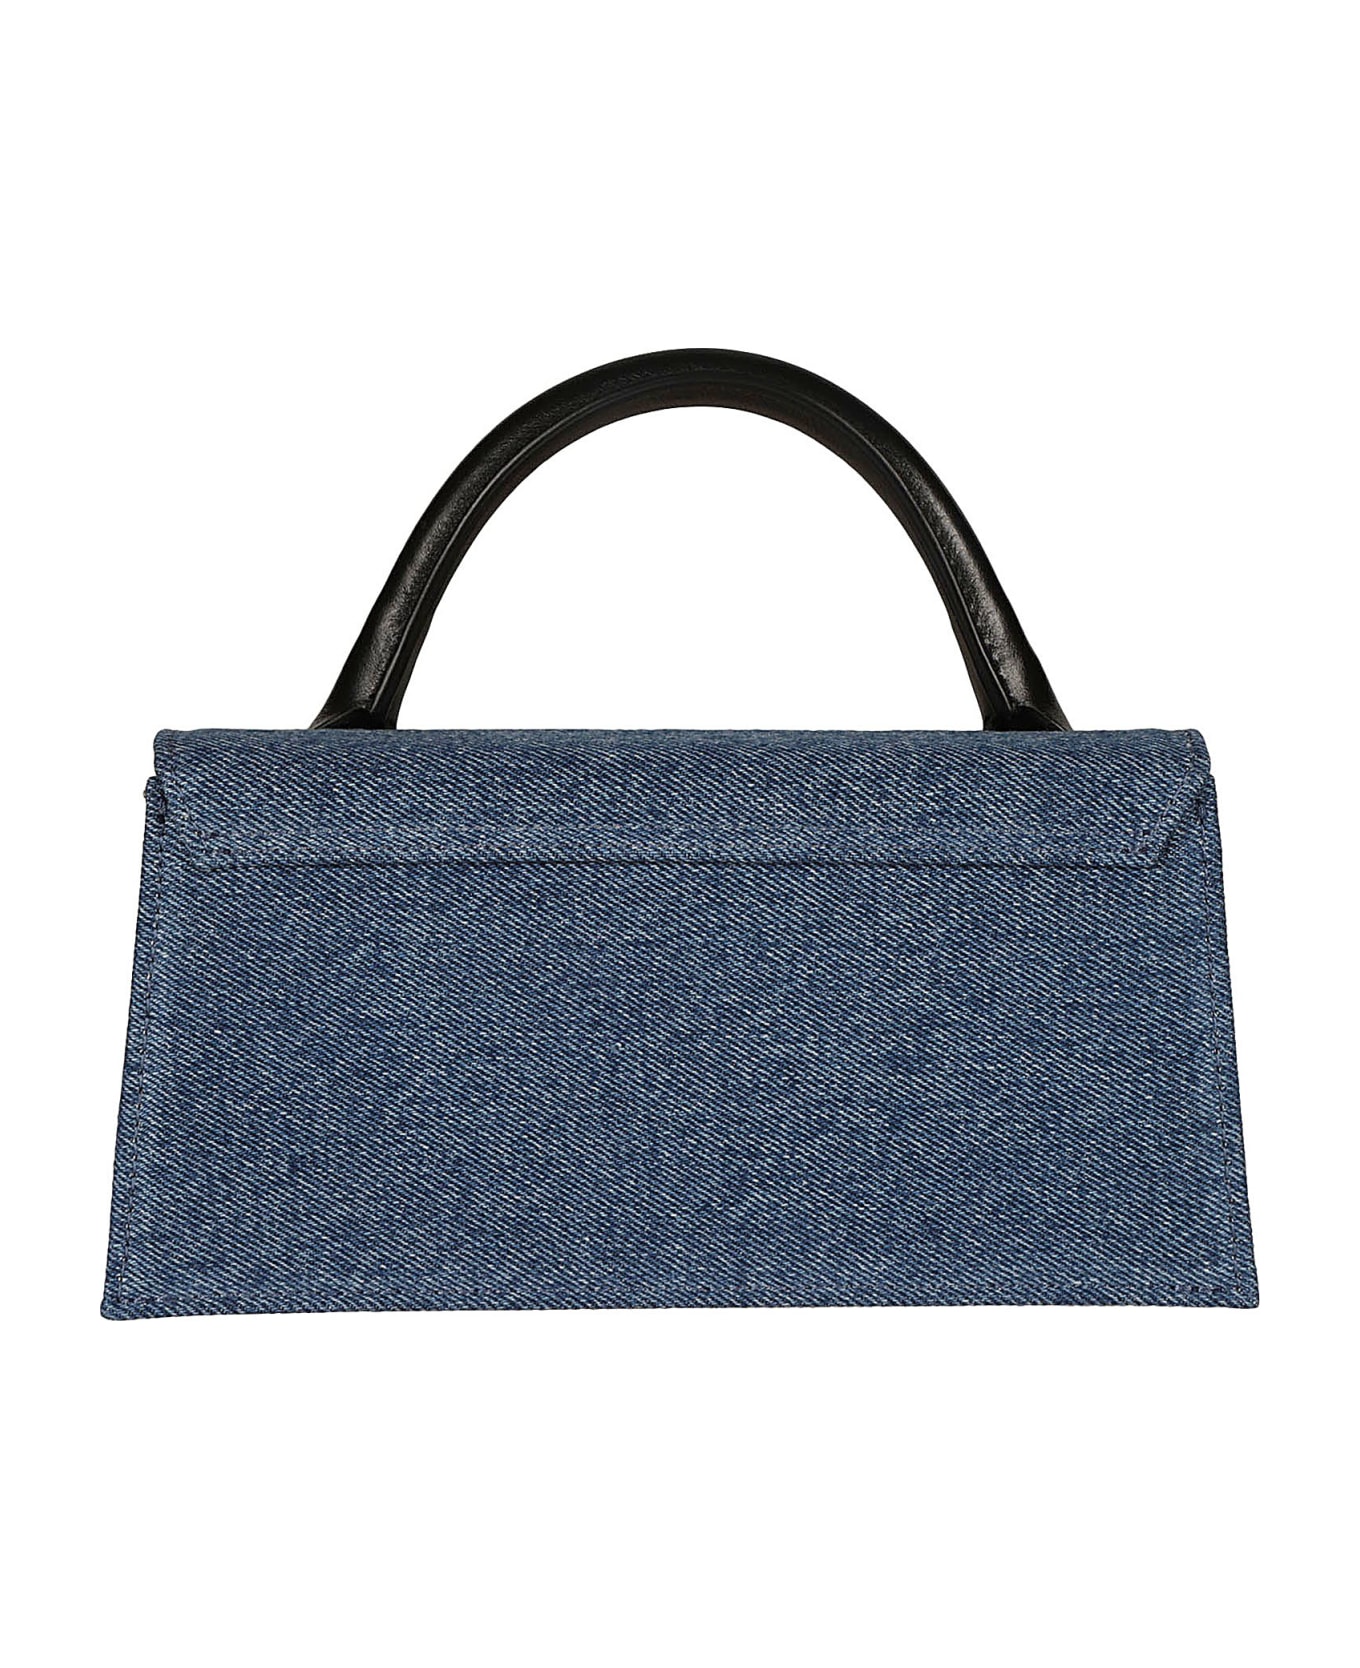 Jacquemus Le Chiquito Long Tote - Blue トートバッグ